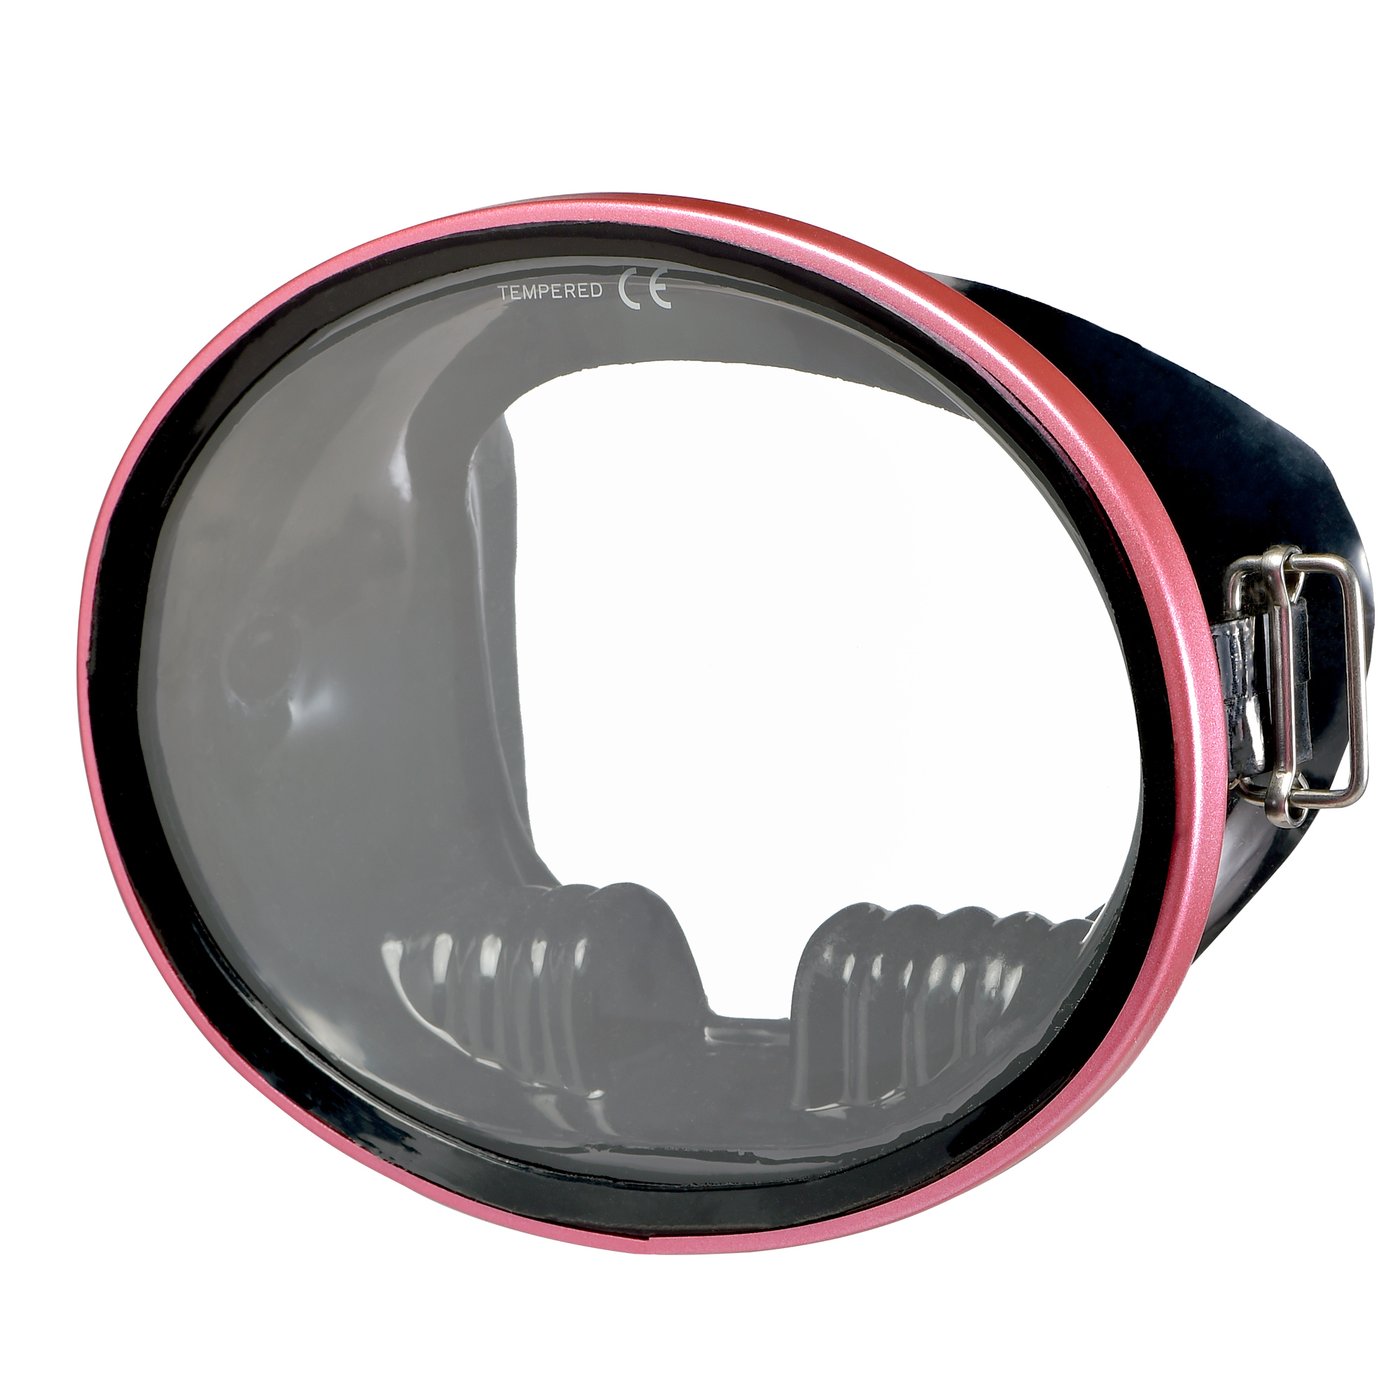 IST Tortuga Traditional Oval Single Lens Mask - DIPNDIVE